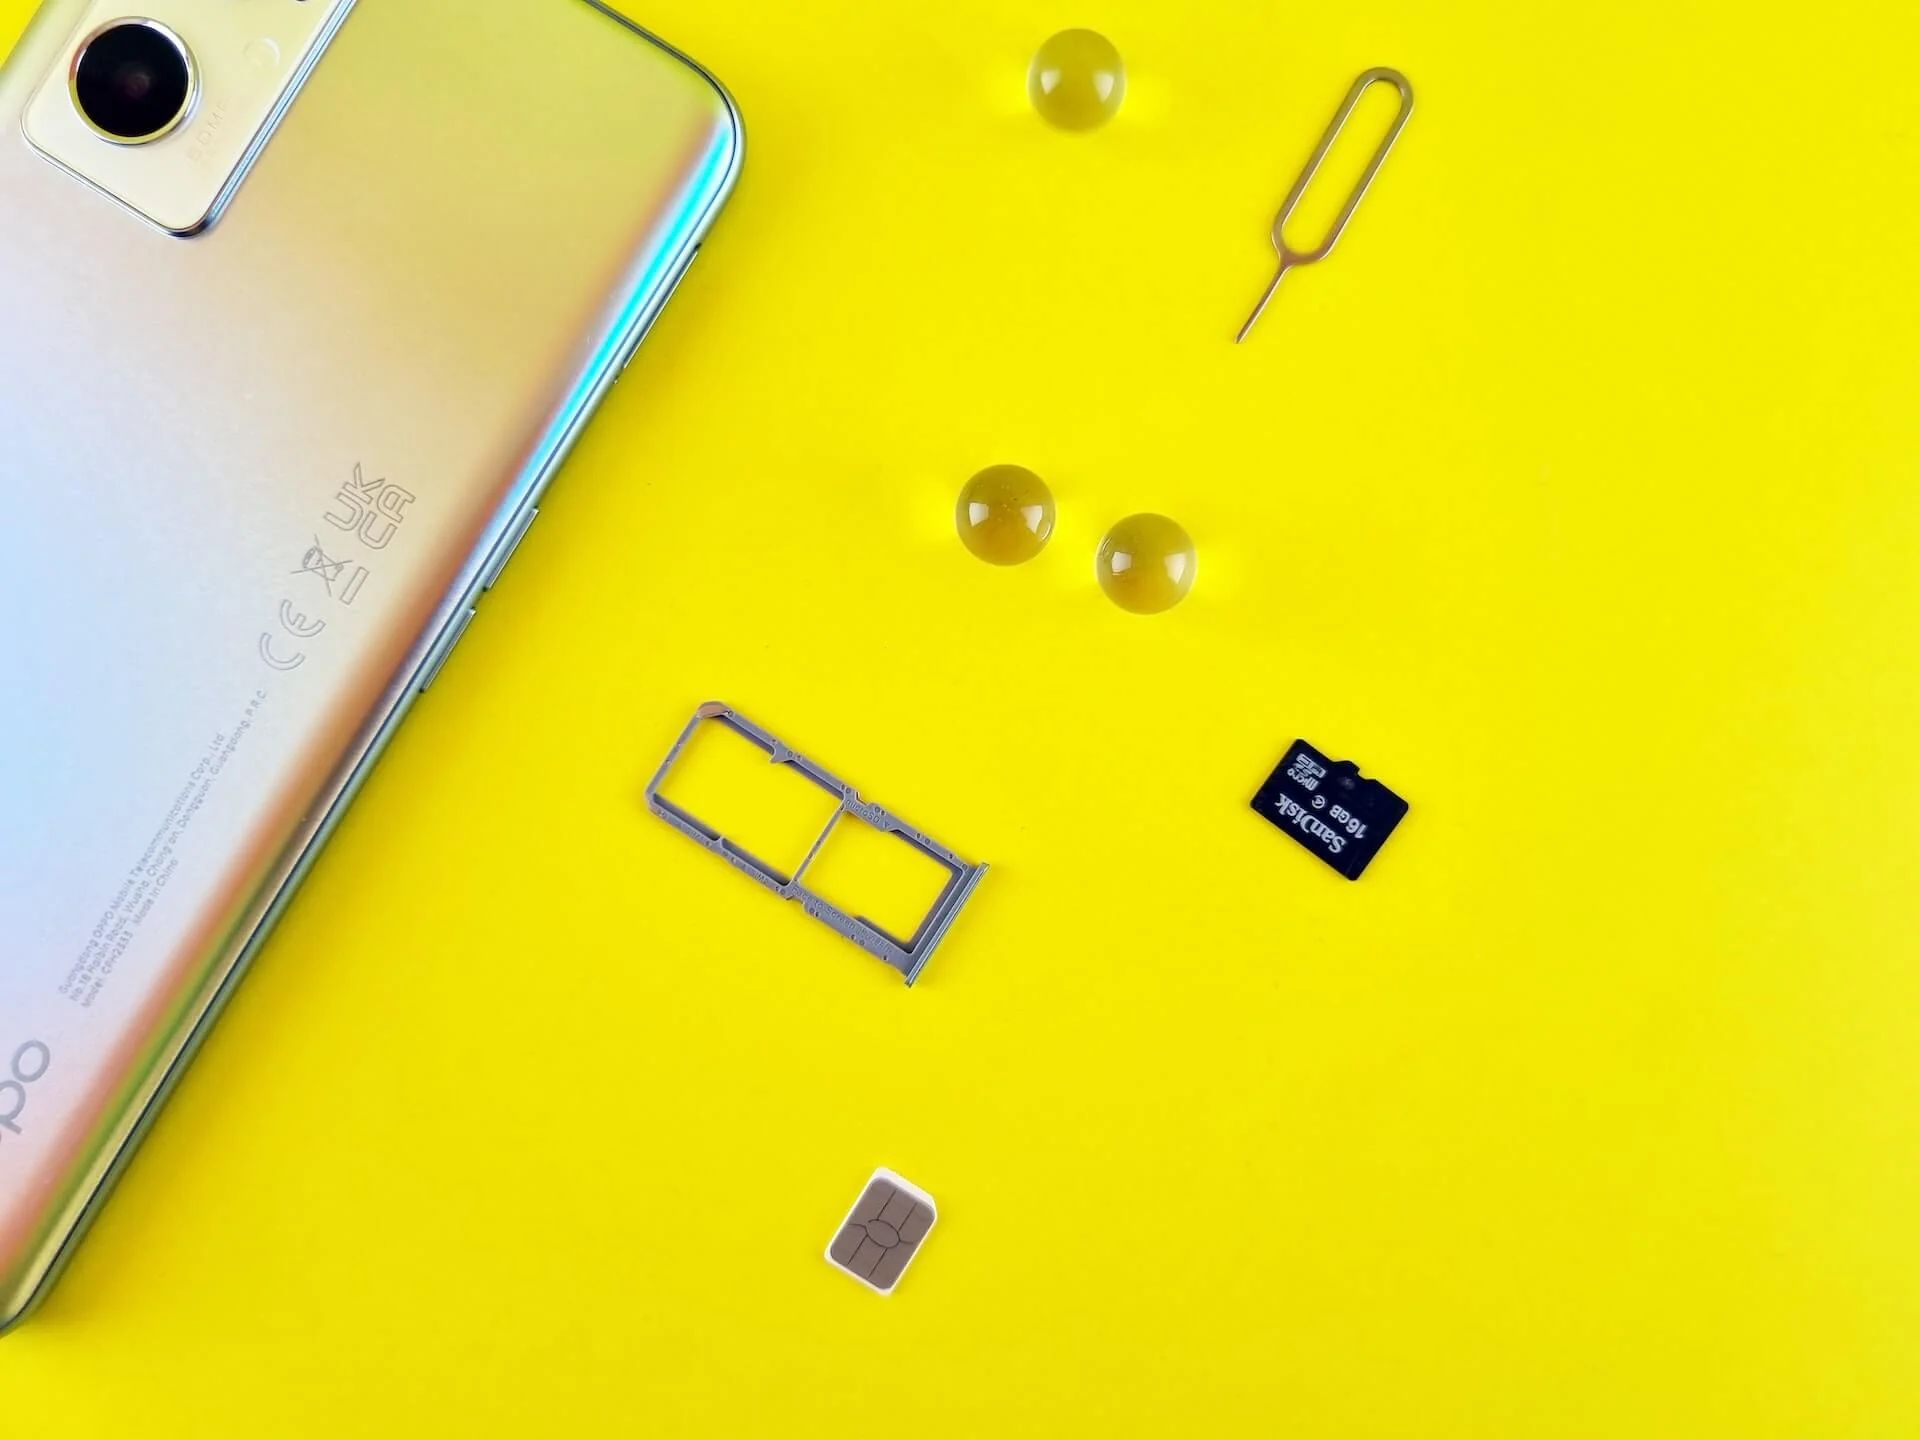 Resetting SIM Card On Android: Essential Steps